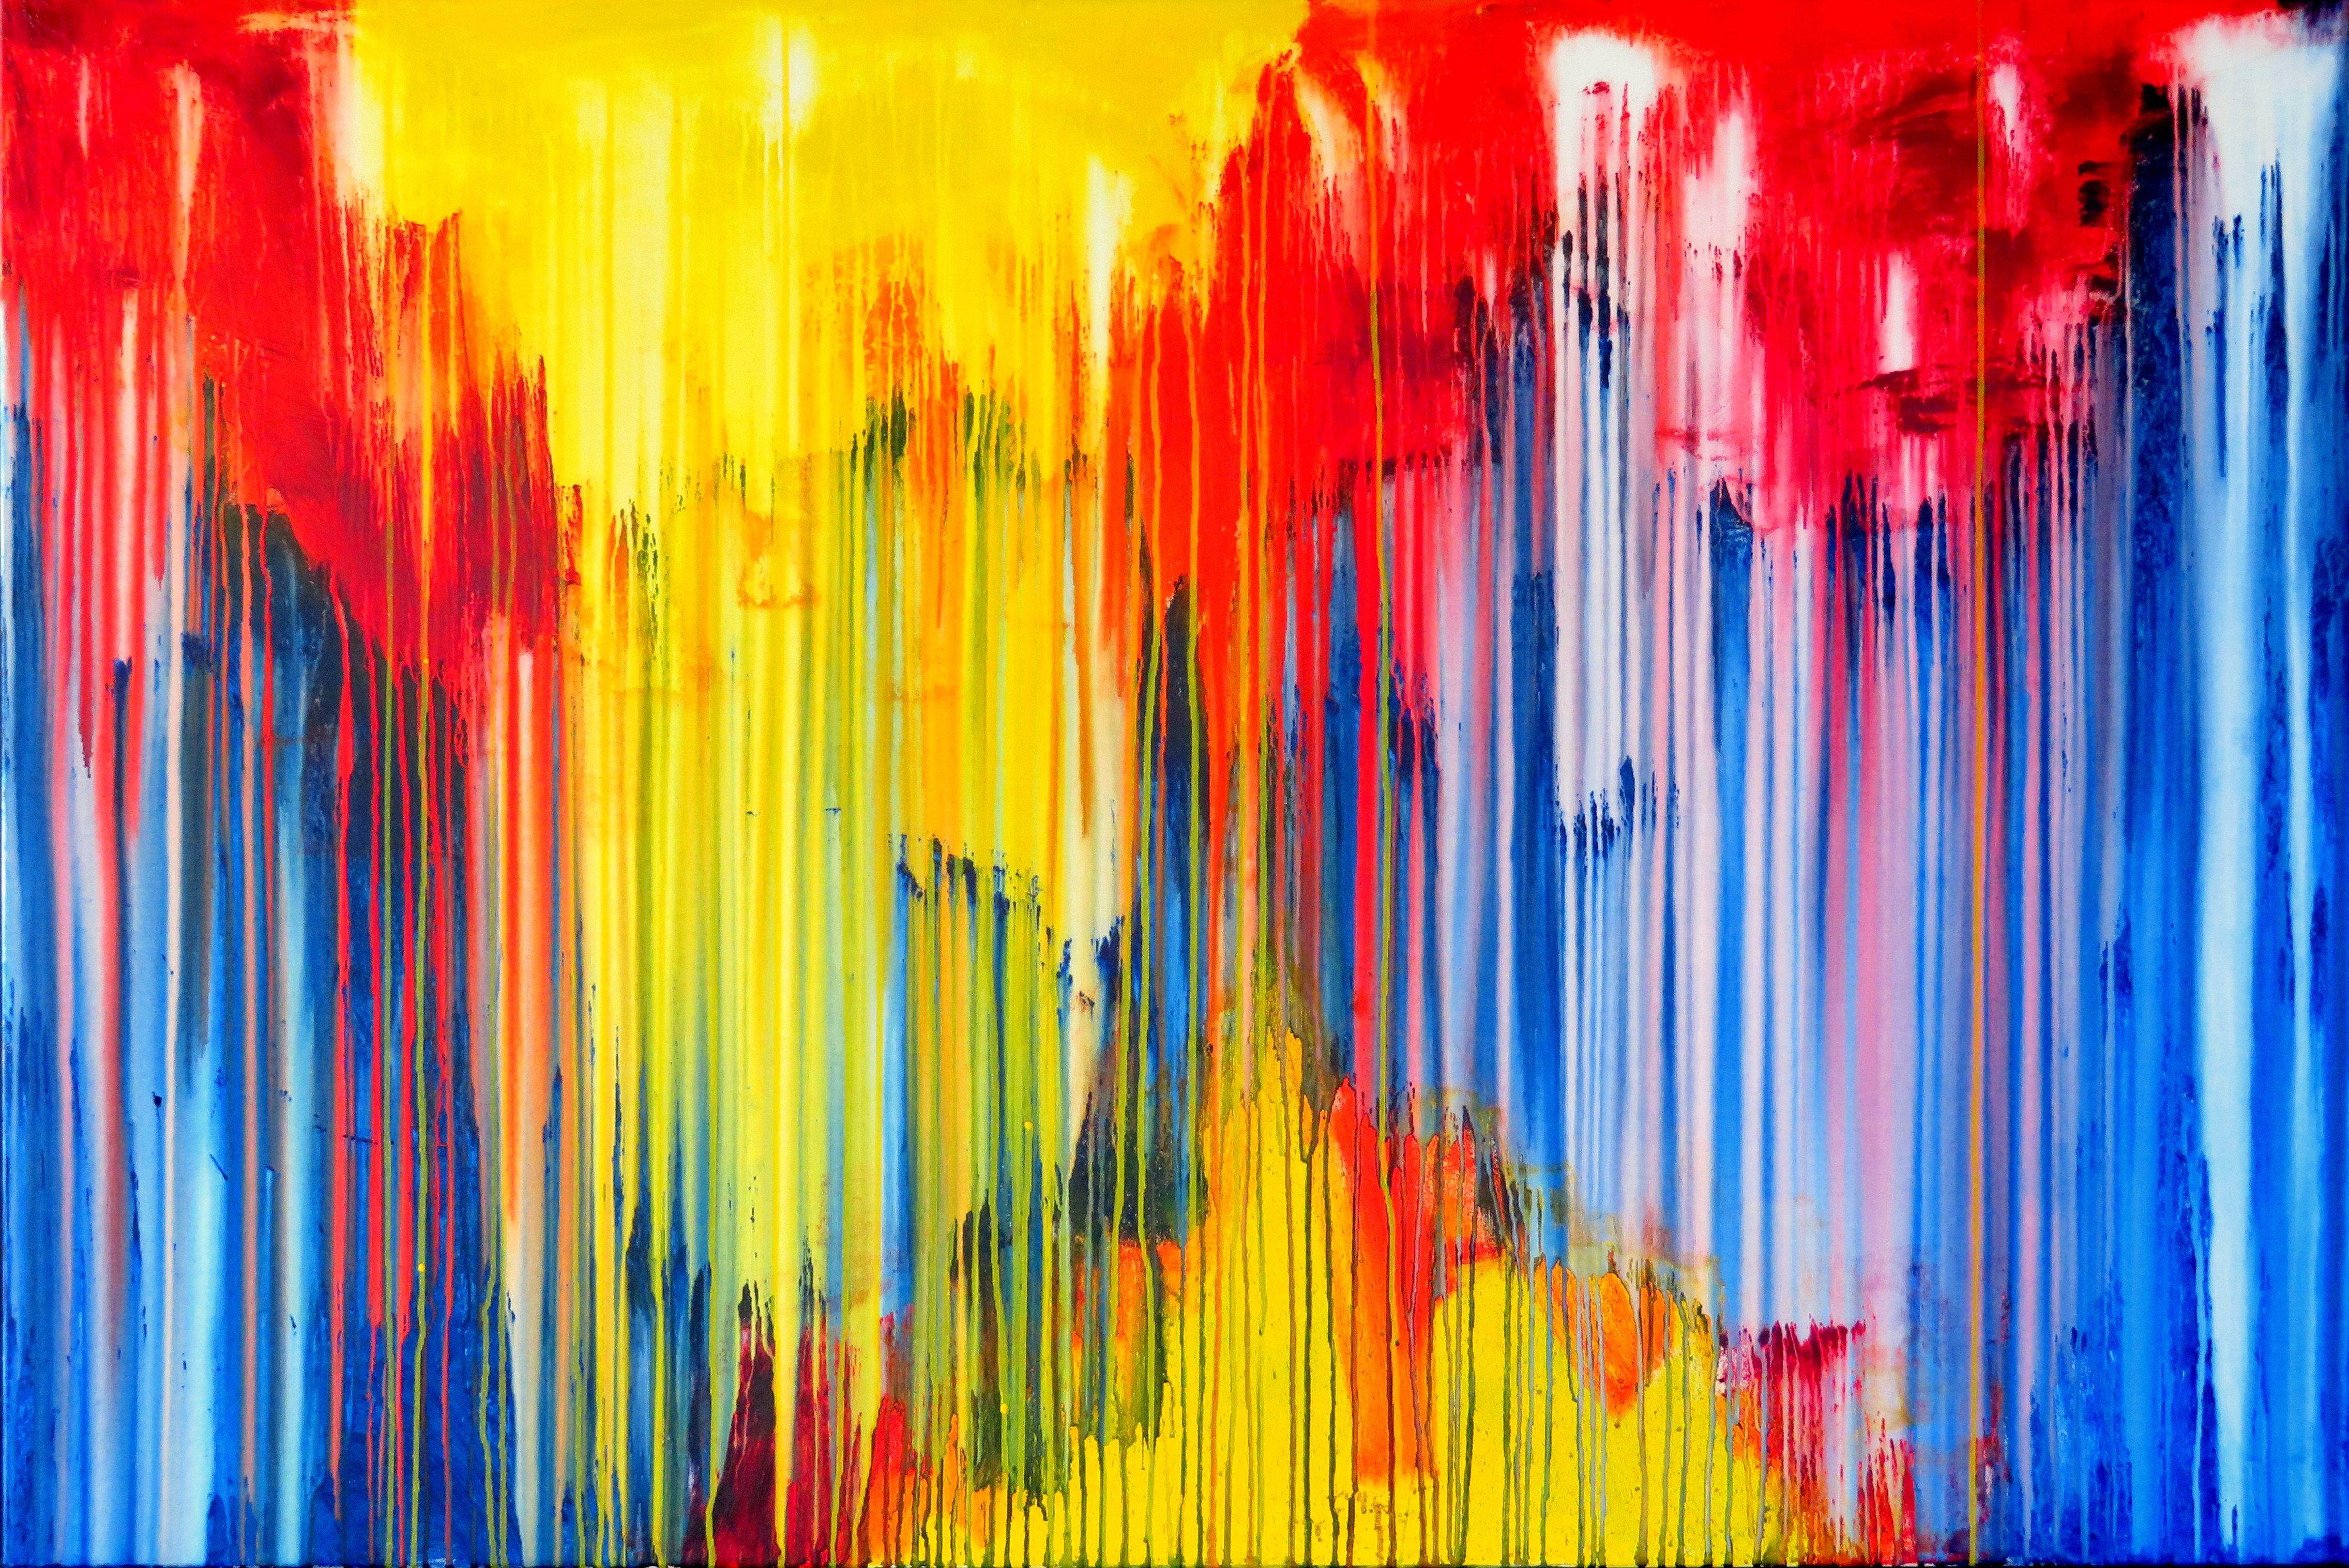 Carla Sá Fernandes Abstract Painting - The Emotional Creation #138, Painting, Acrylic on Canvas